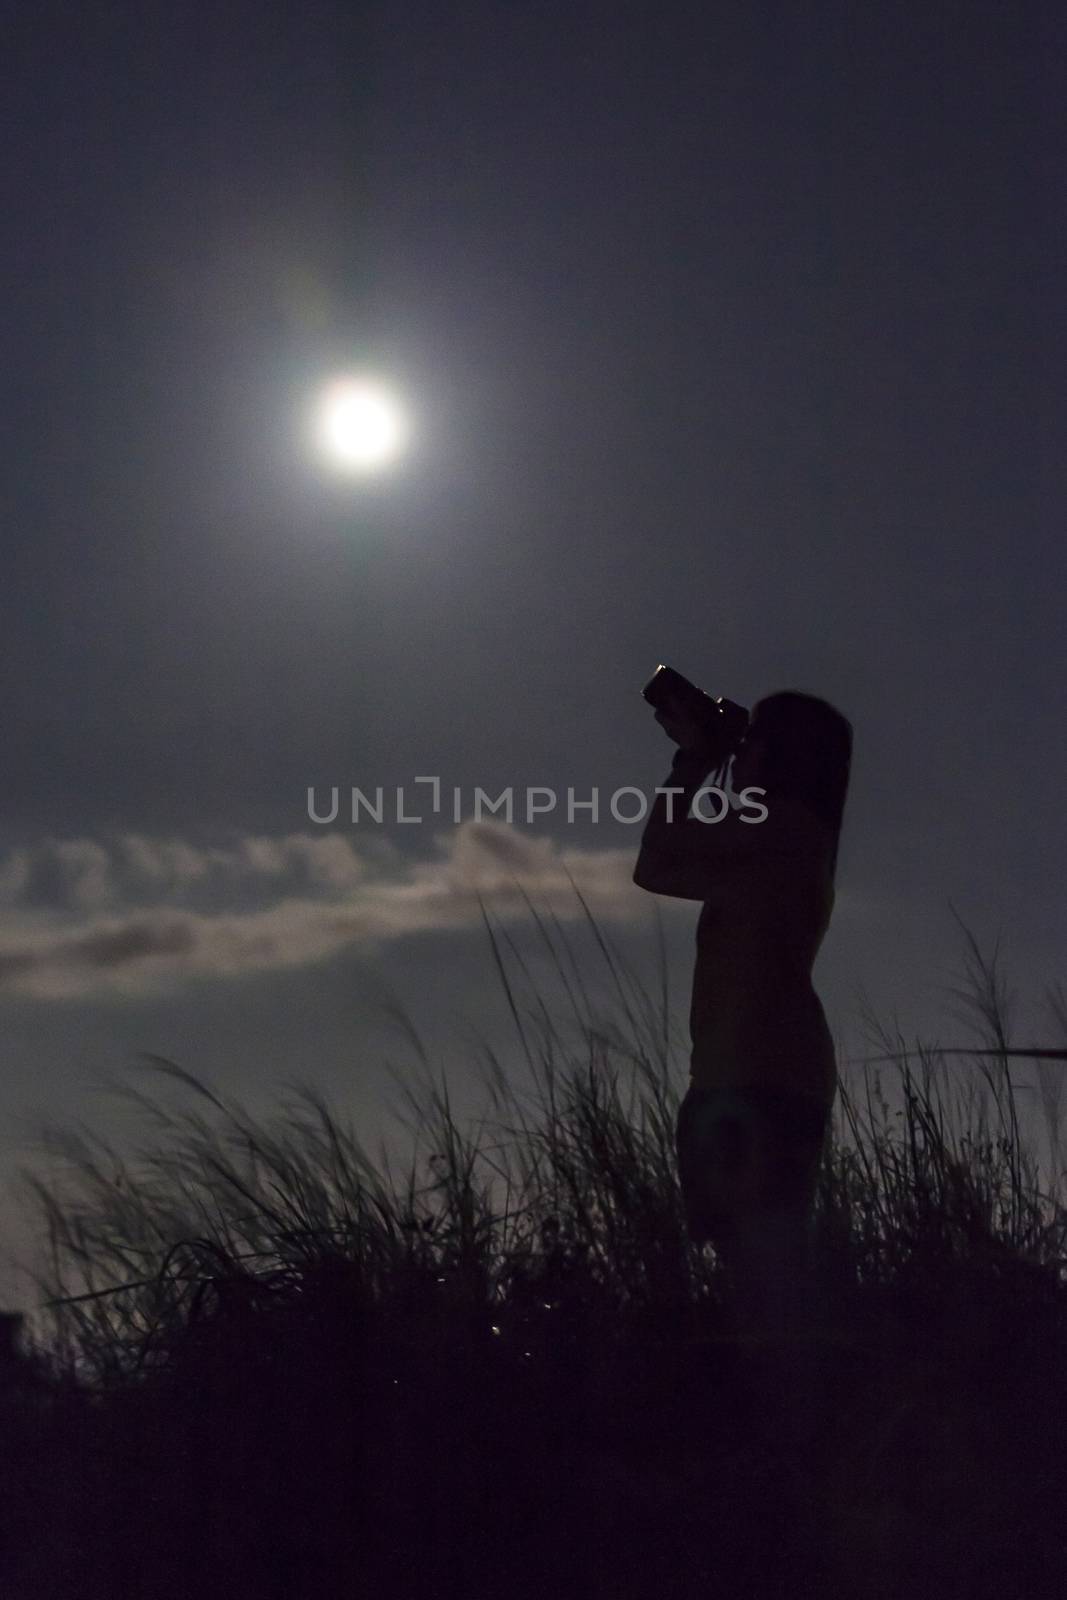 Female photographer under moon by kawing921